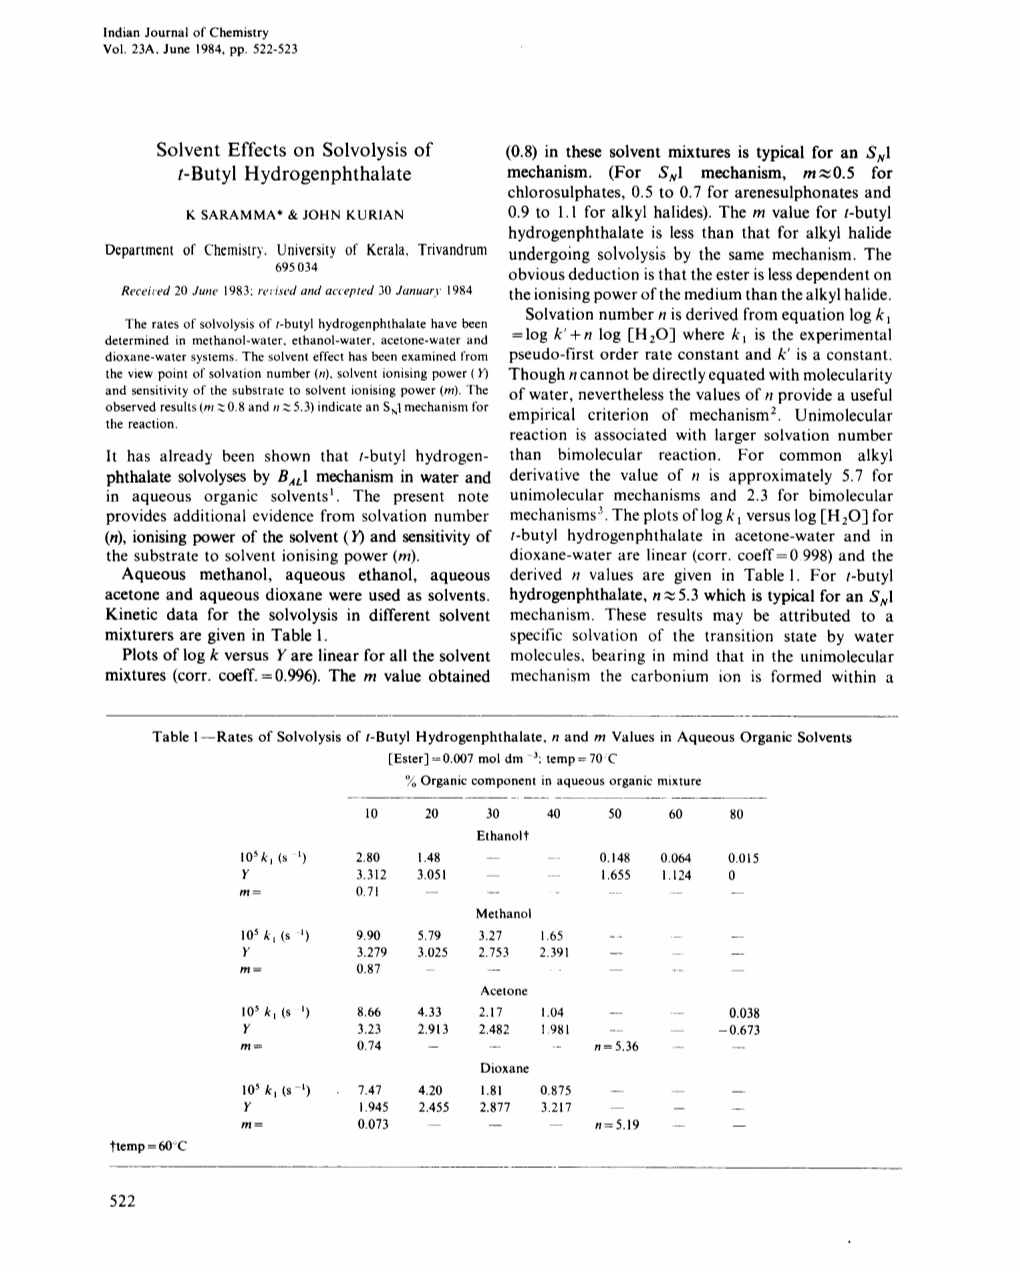 Solvent Effects on Solvolysis of R-Butyl Hydrogenphthalate